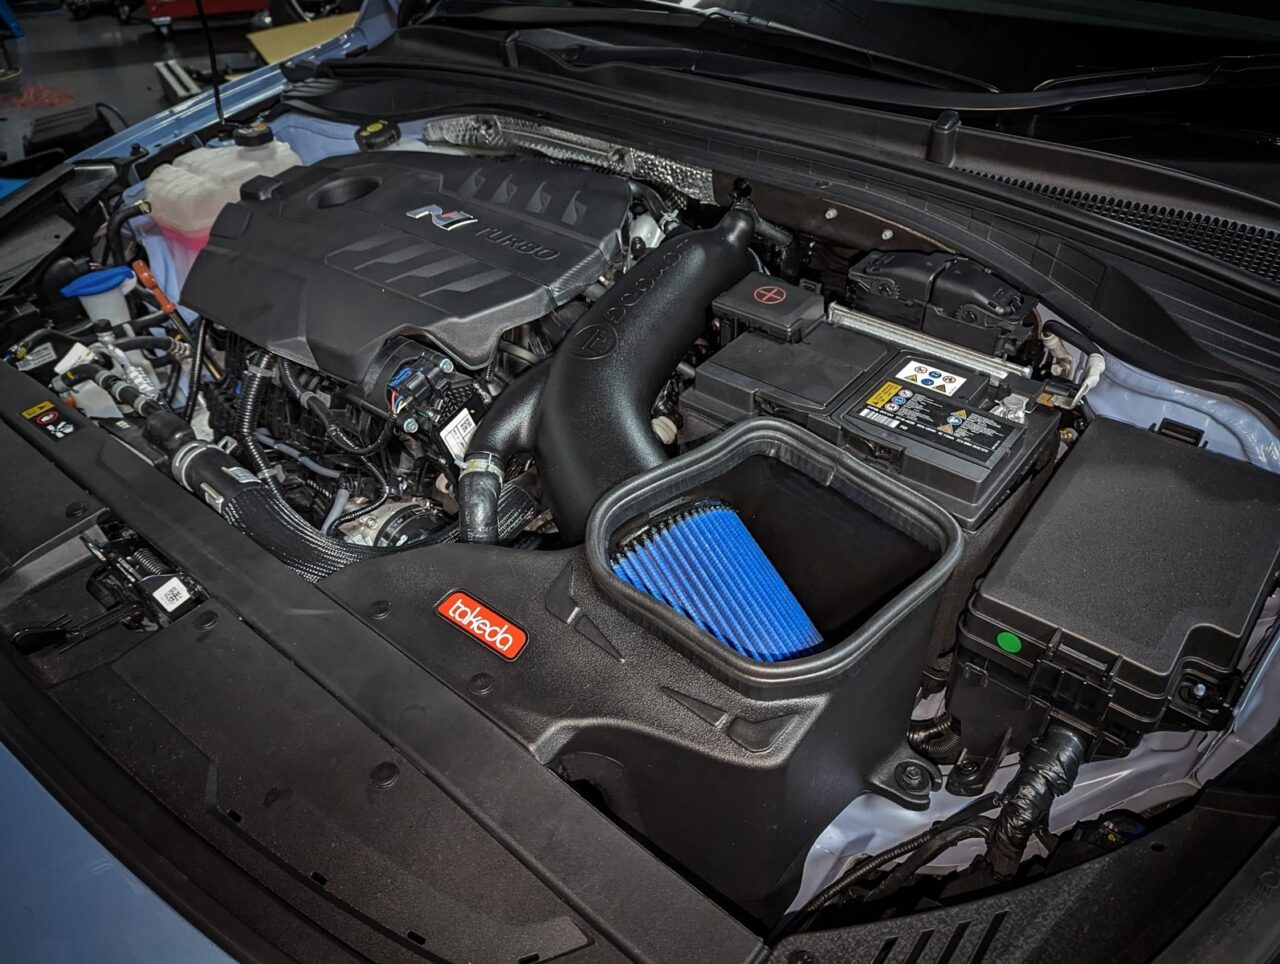 Aftermarket Takeda aFe brand cold air intake (CAI) with bright blue filter installed on Non-US Hyundai i30N engine bay